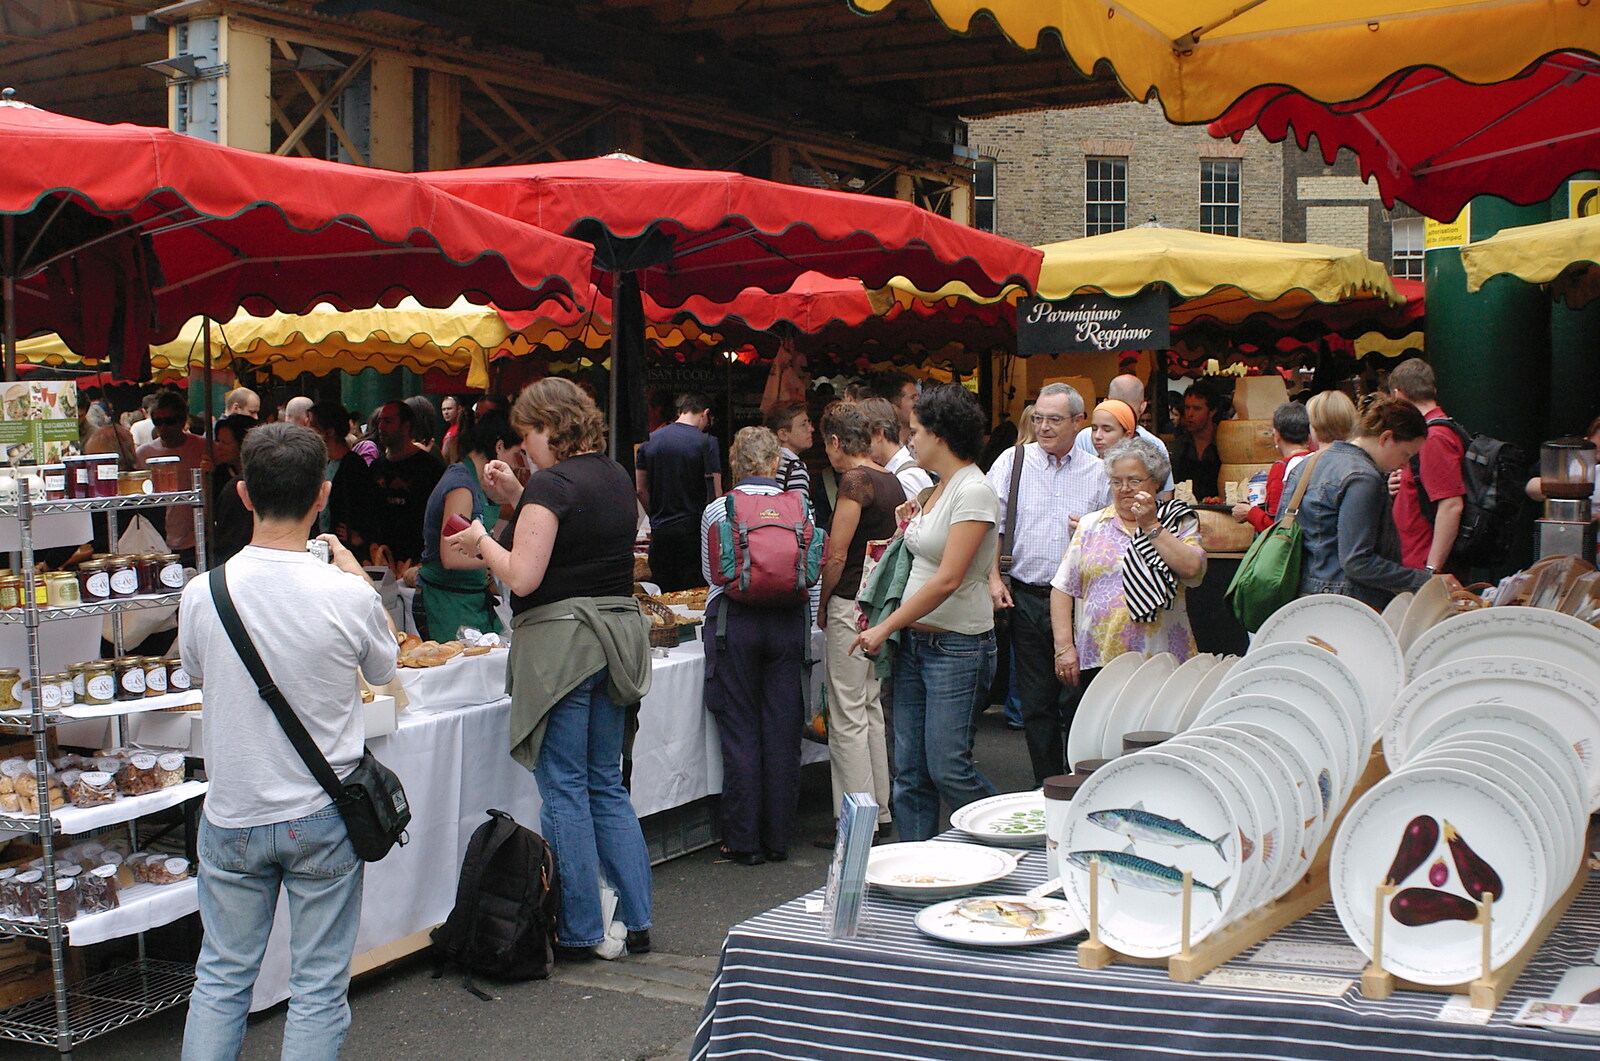 The parasols of Borough from Borough Market and North Clapham Tapas, London - 23rd July 2005